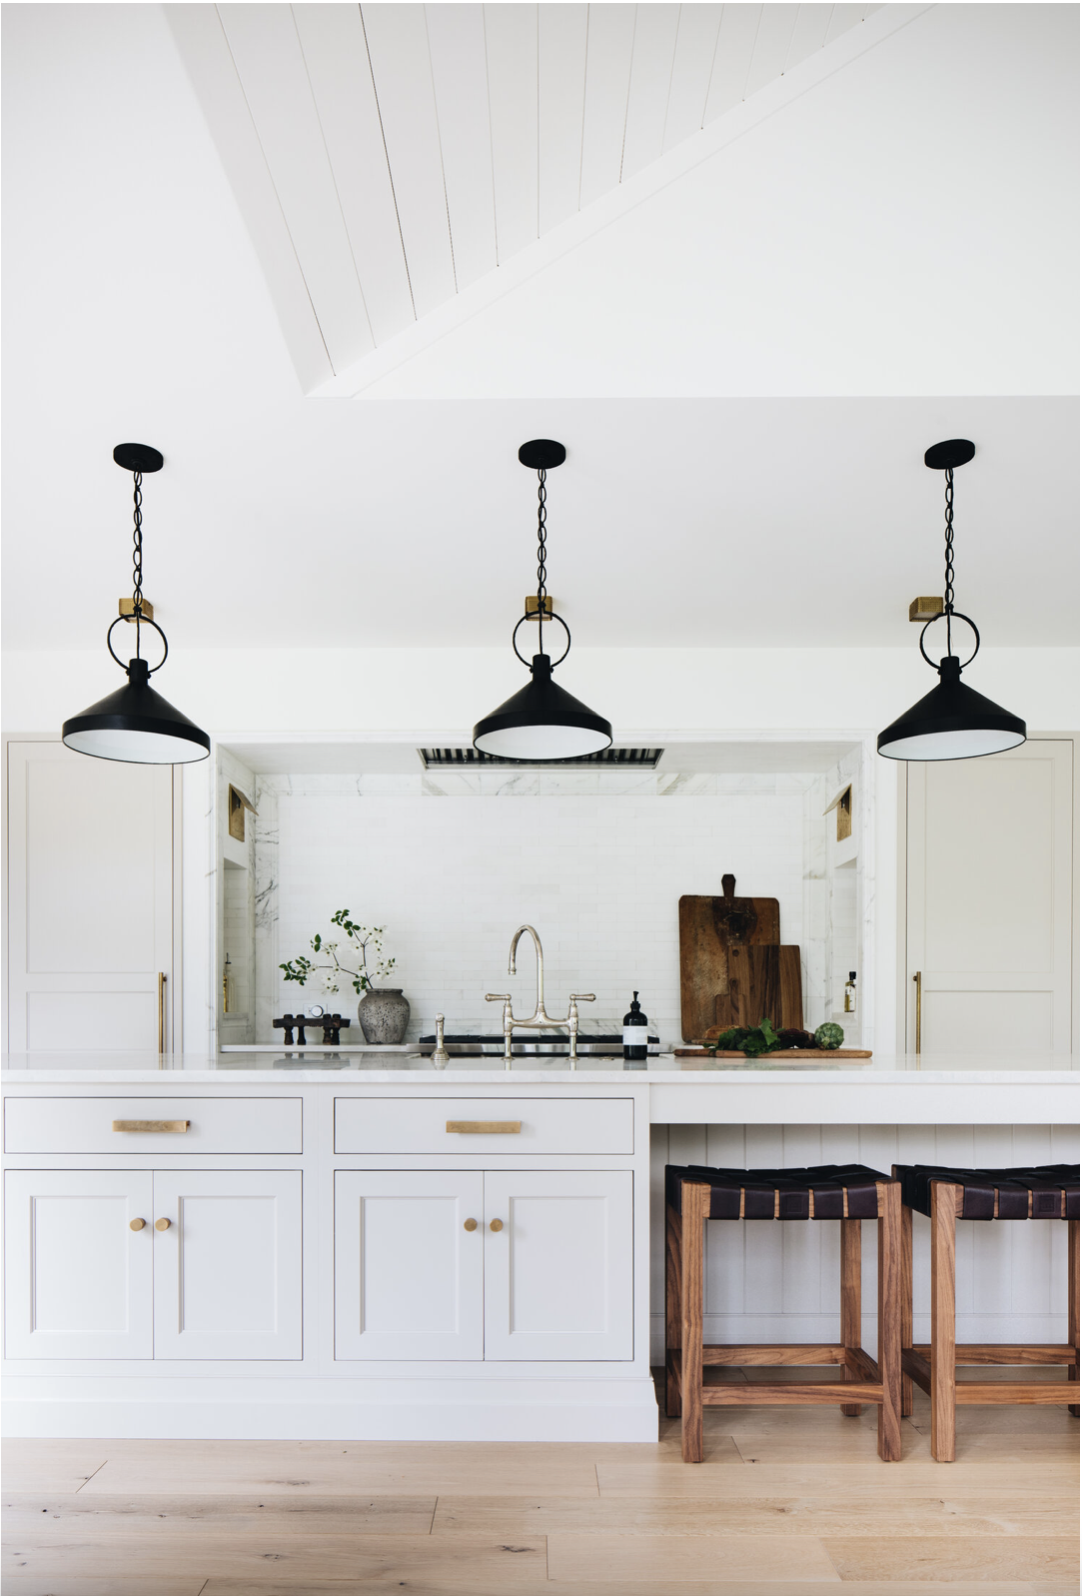 Sharing All of the Details From the McGee Home Kitchen